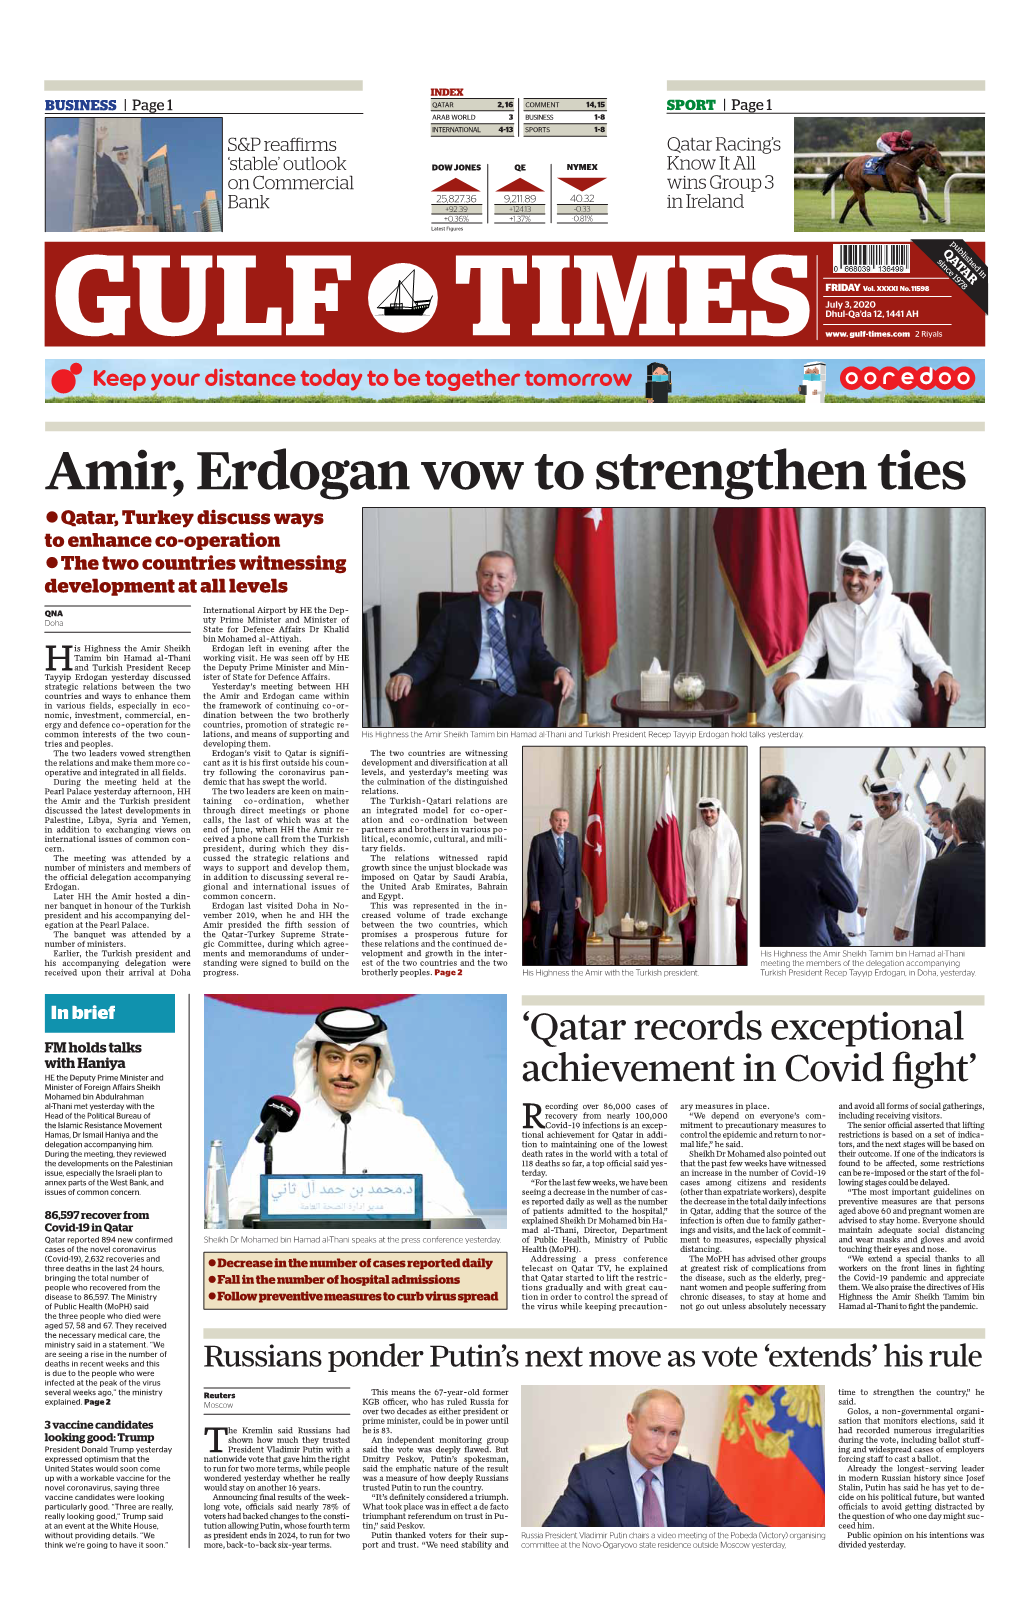 Amir, Erdogan Vow to Strengthen Ties Zqatar, Turkey Discuss Ways to Enhance Co-Operation Zthe Two Countries Witnessing Development at All Levels